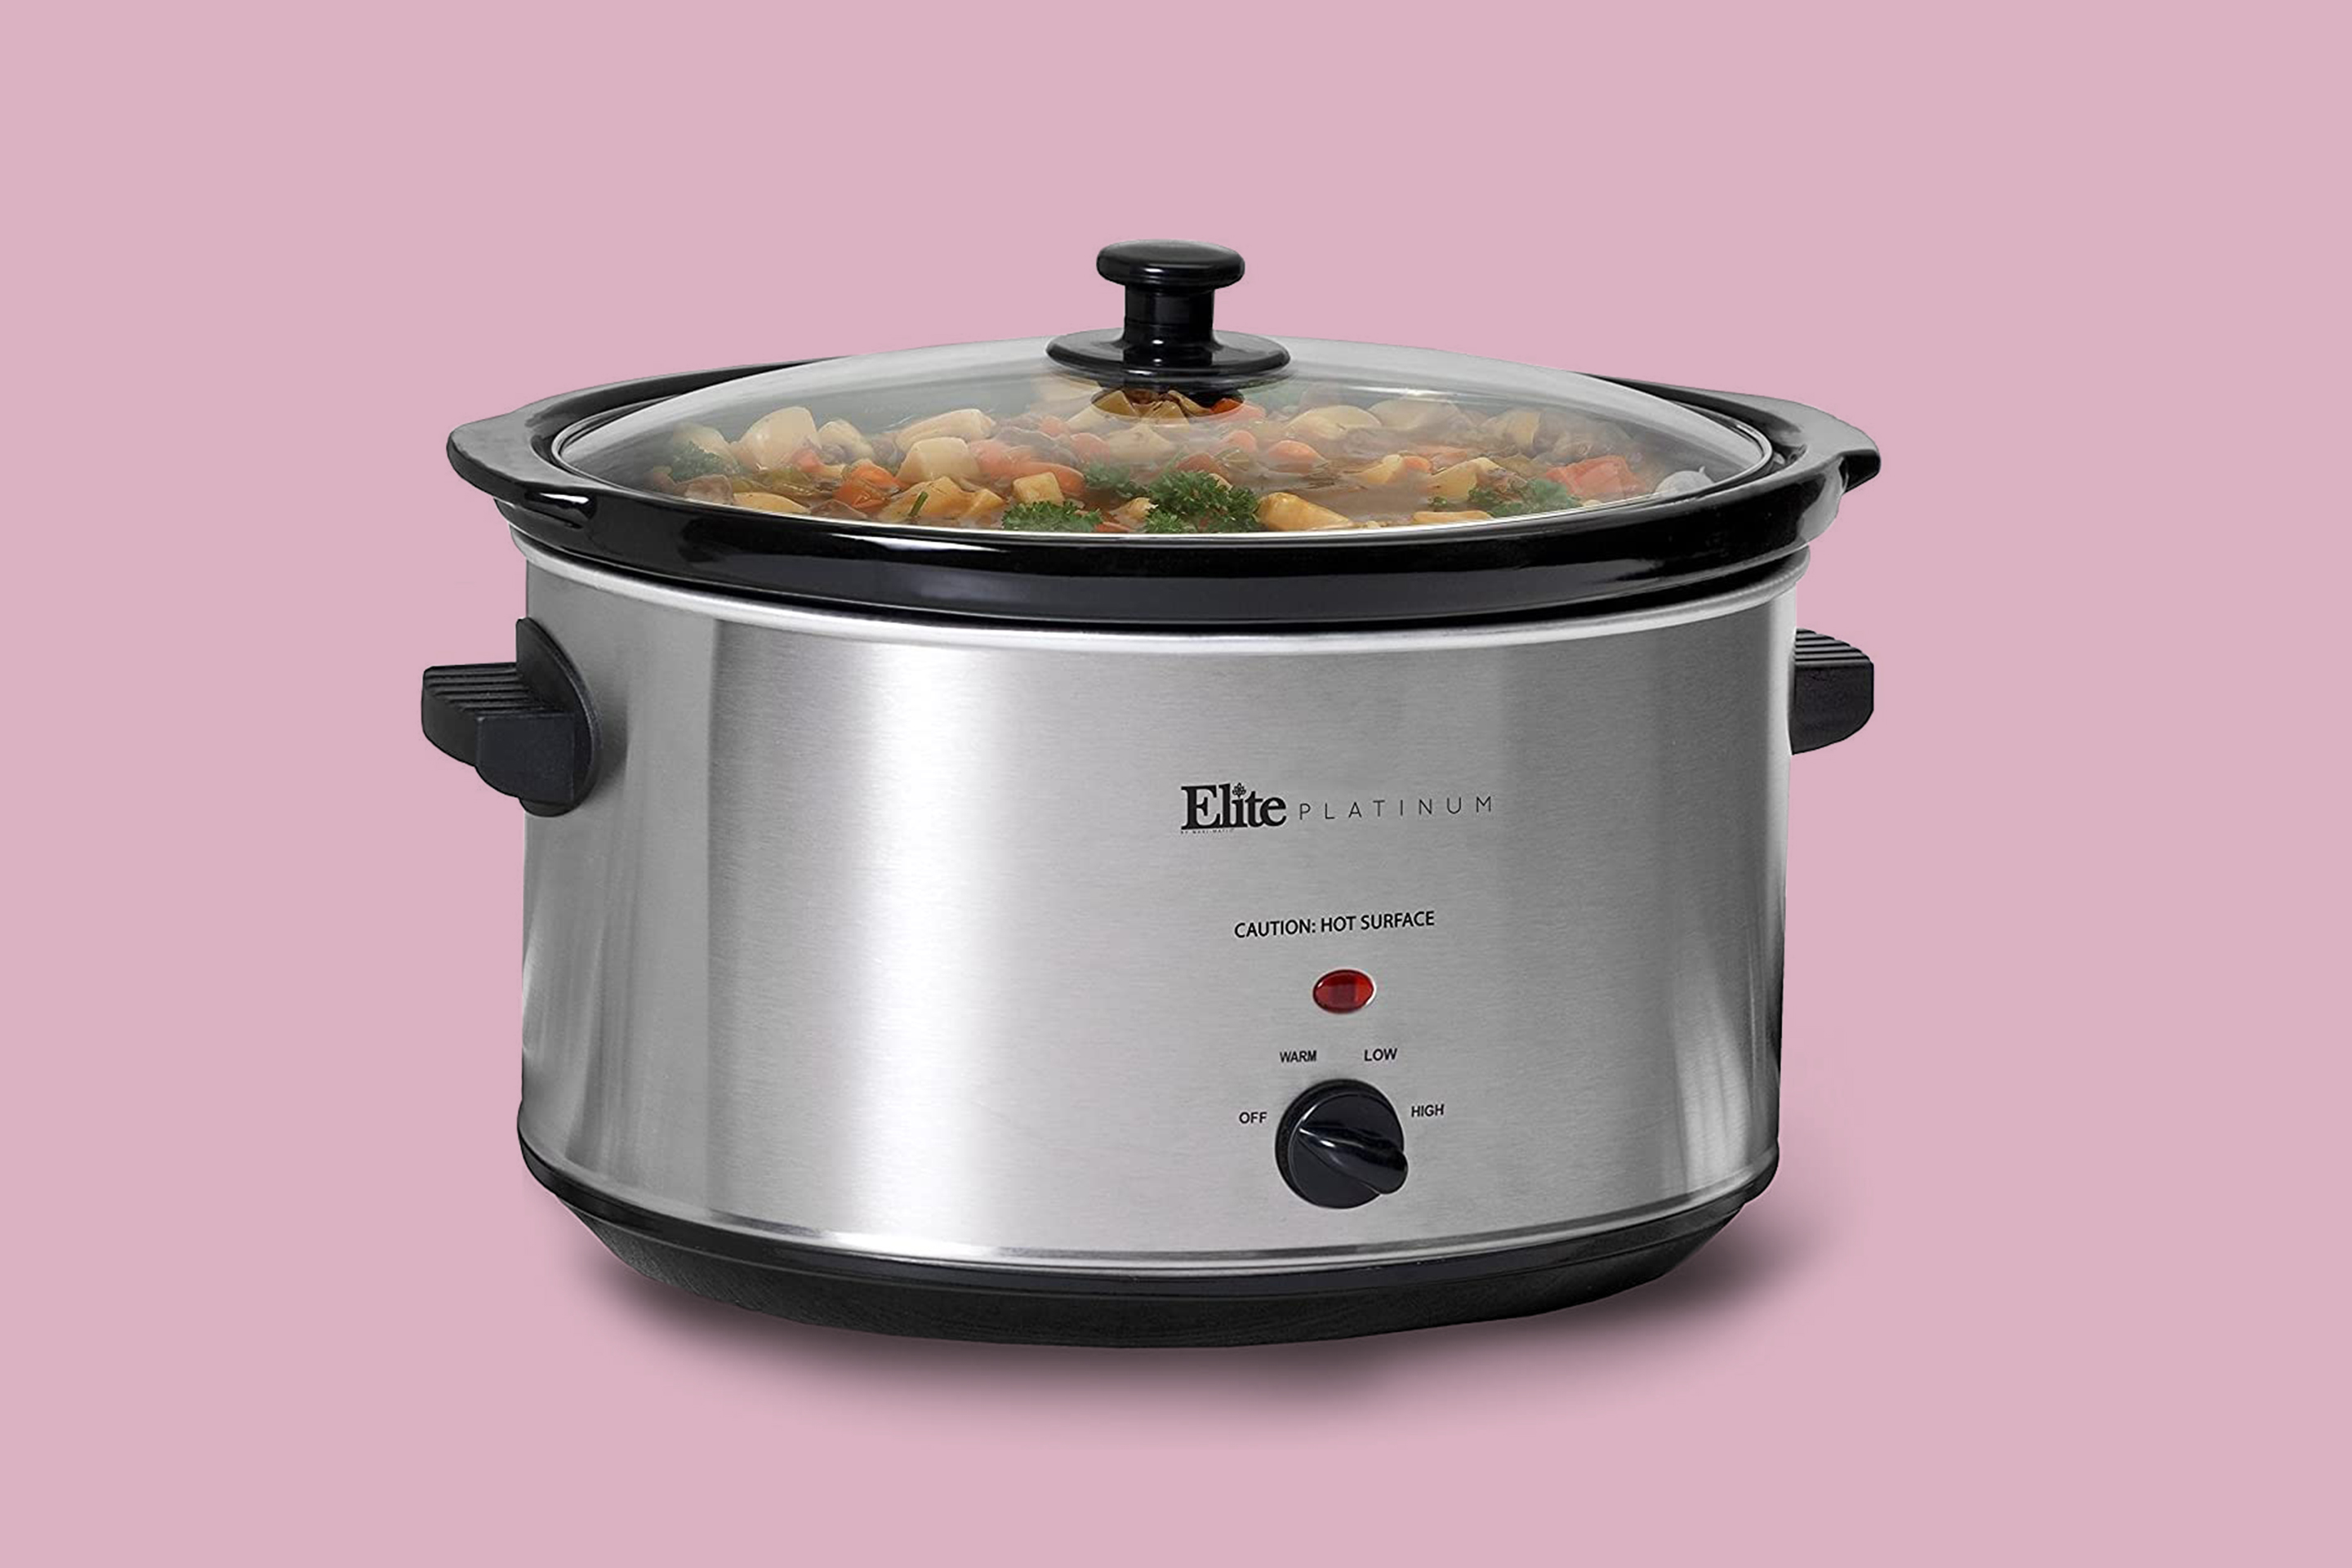 Elite Gourmet Maxi-Matic Electric Rice Cooker with Stainless Steel